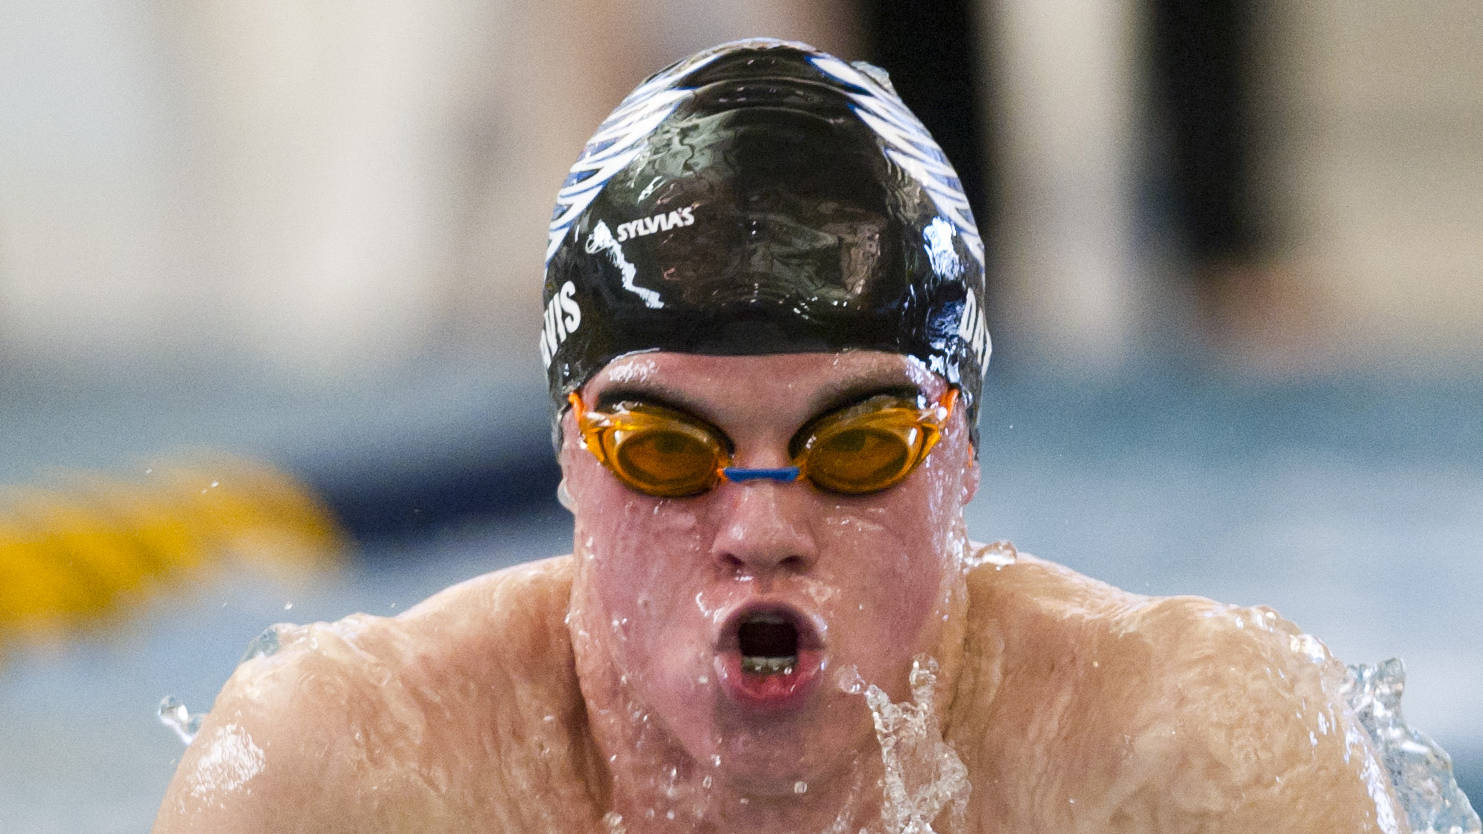 Thunder Mountain’s Bergen Davis swims the boys 100-yard breaststroke race during the 2016 state championships at the Dimond Park Aquatics Center.